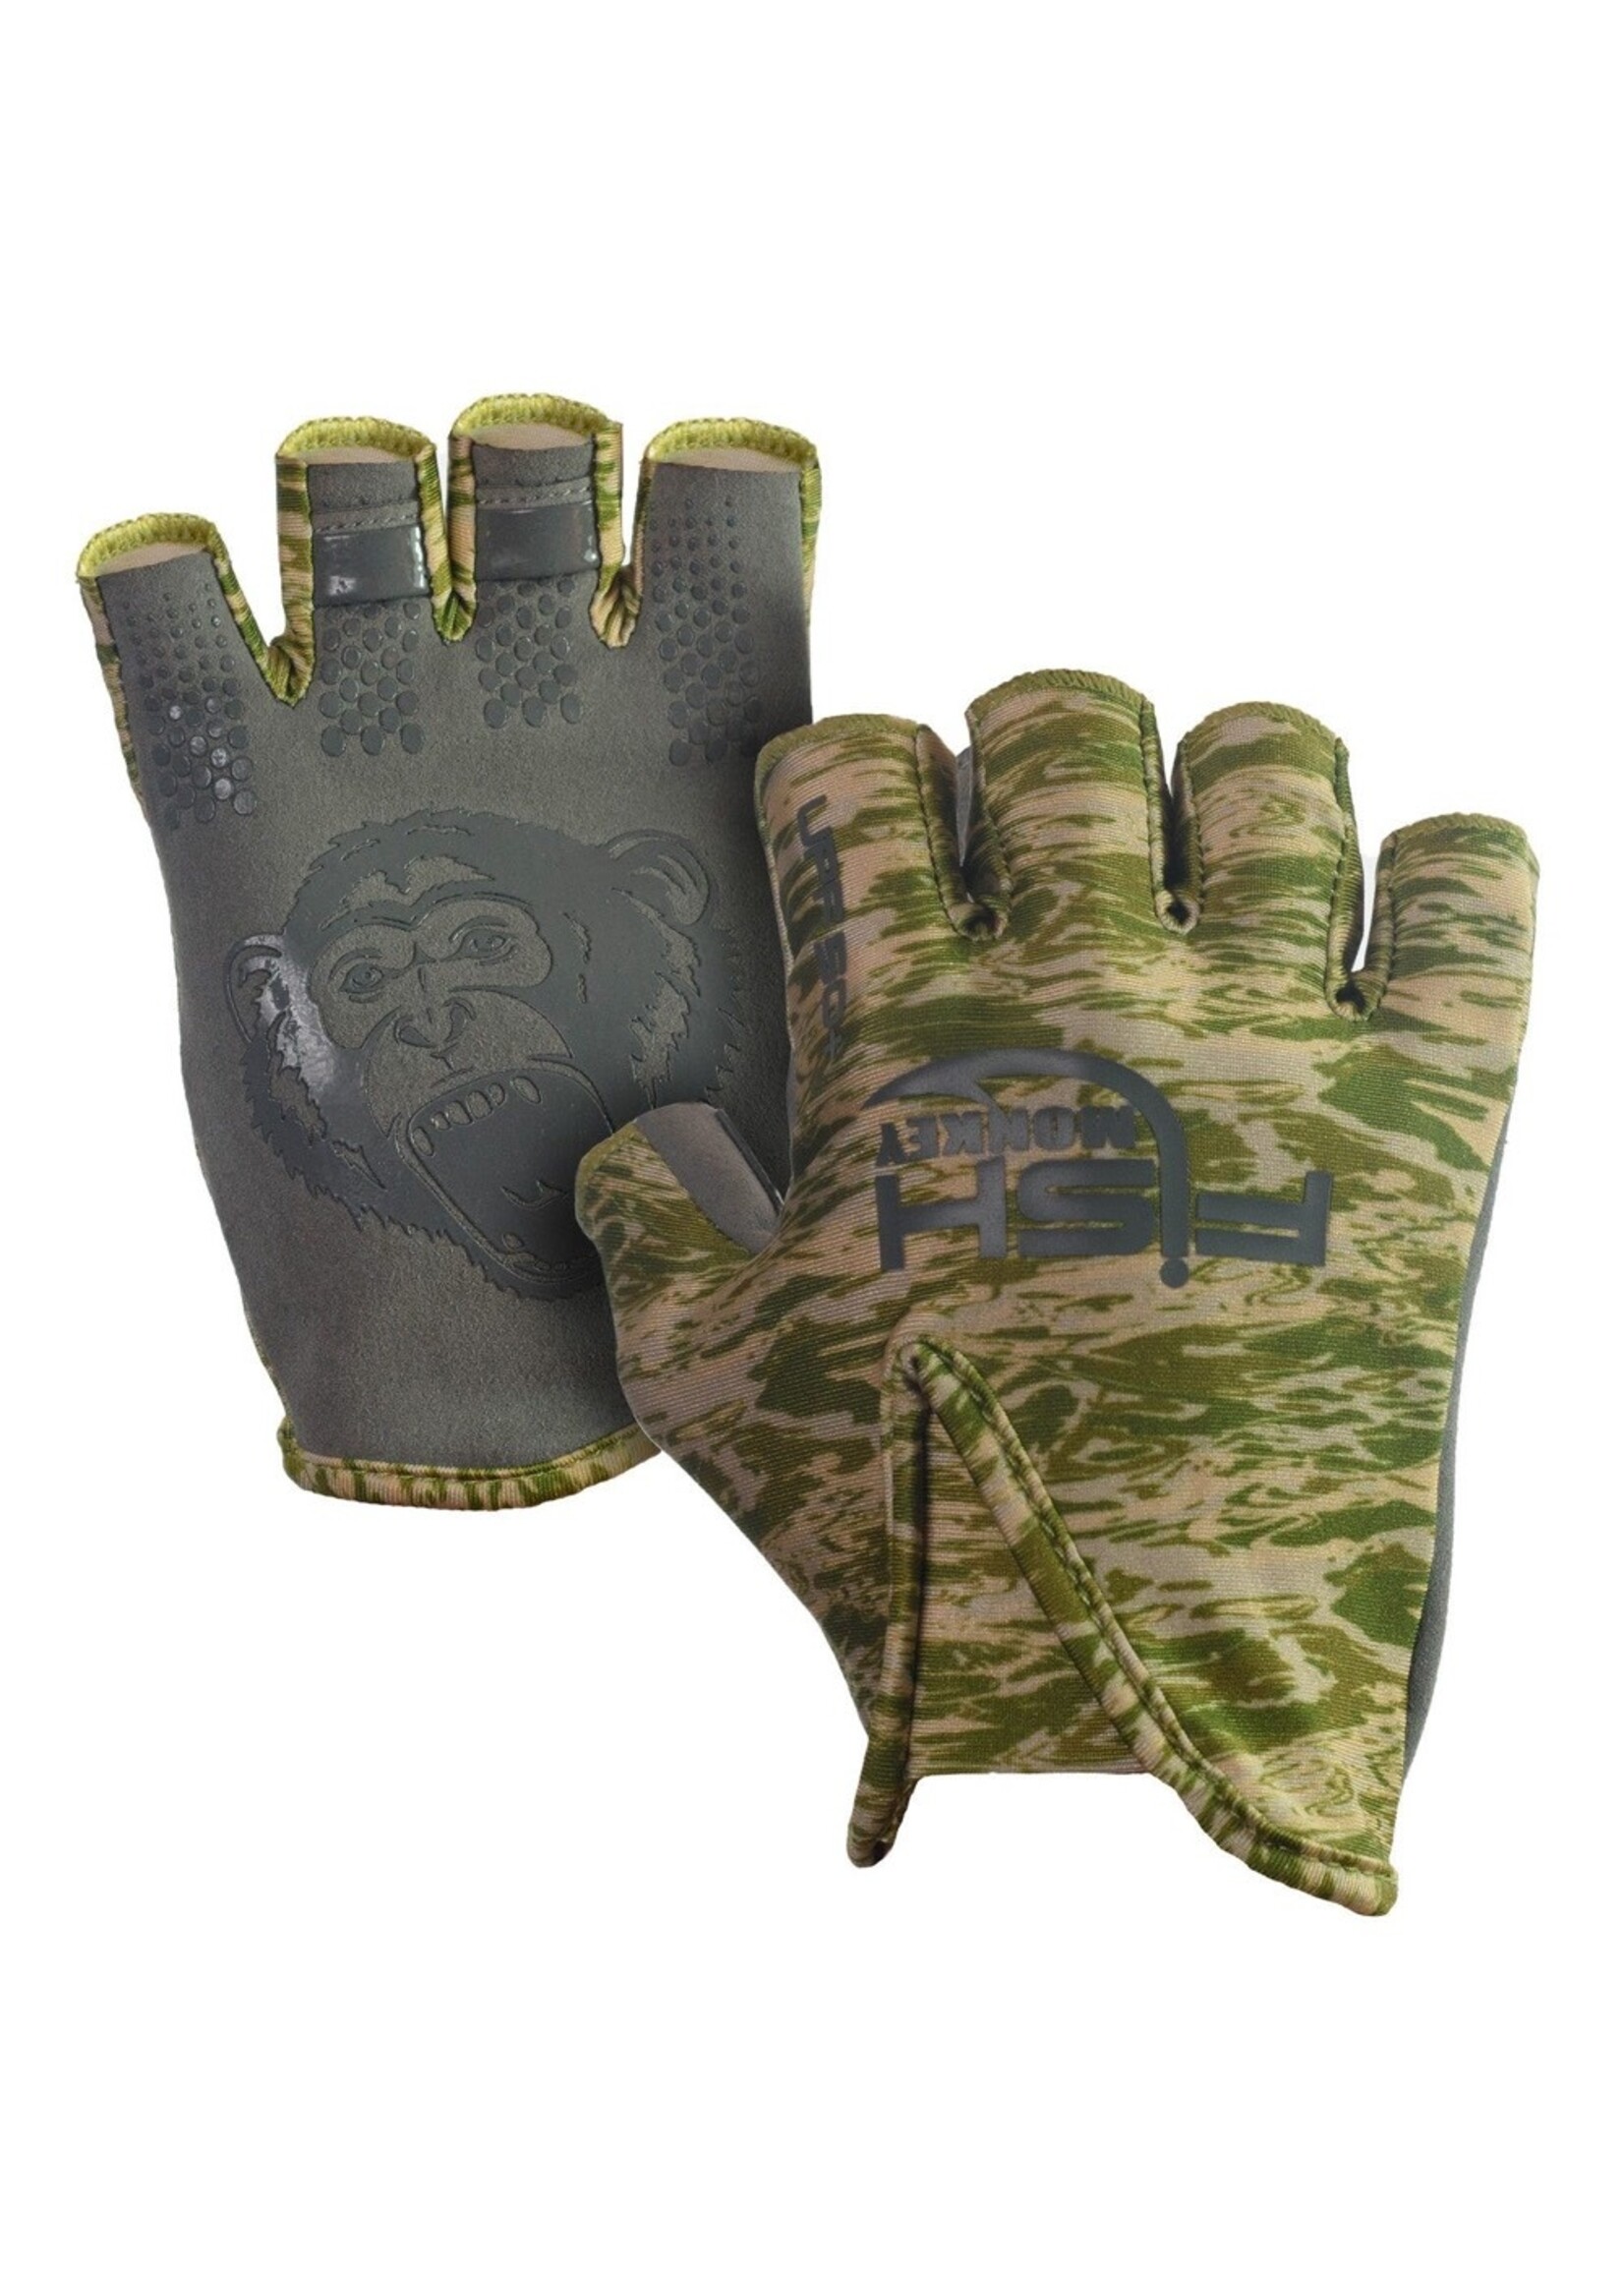 Fish Monkey Stubby Guide Glove - Tackle Shack